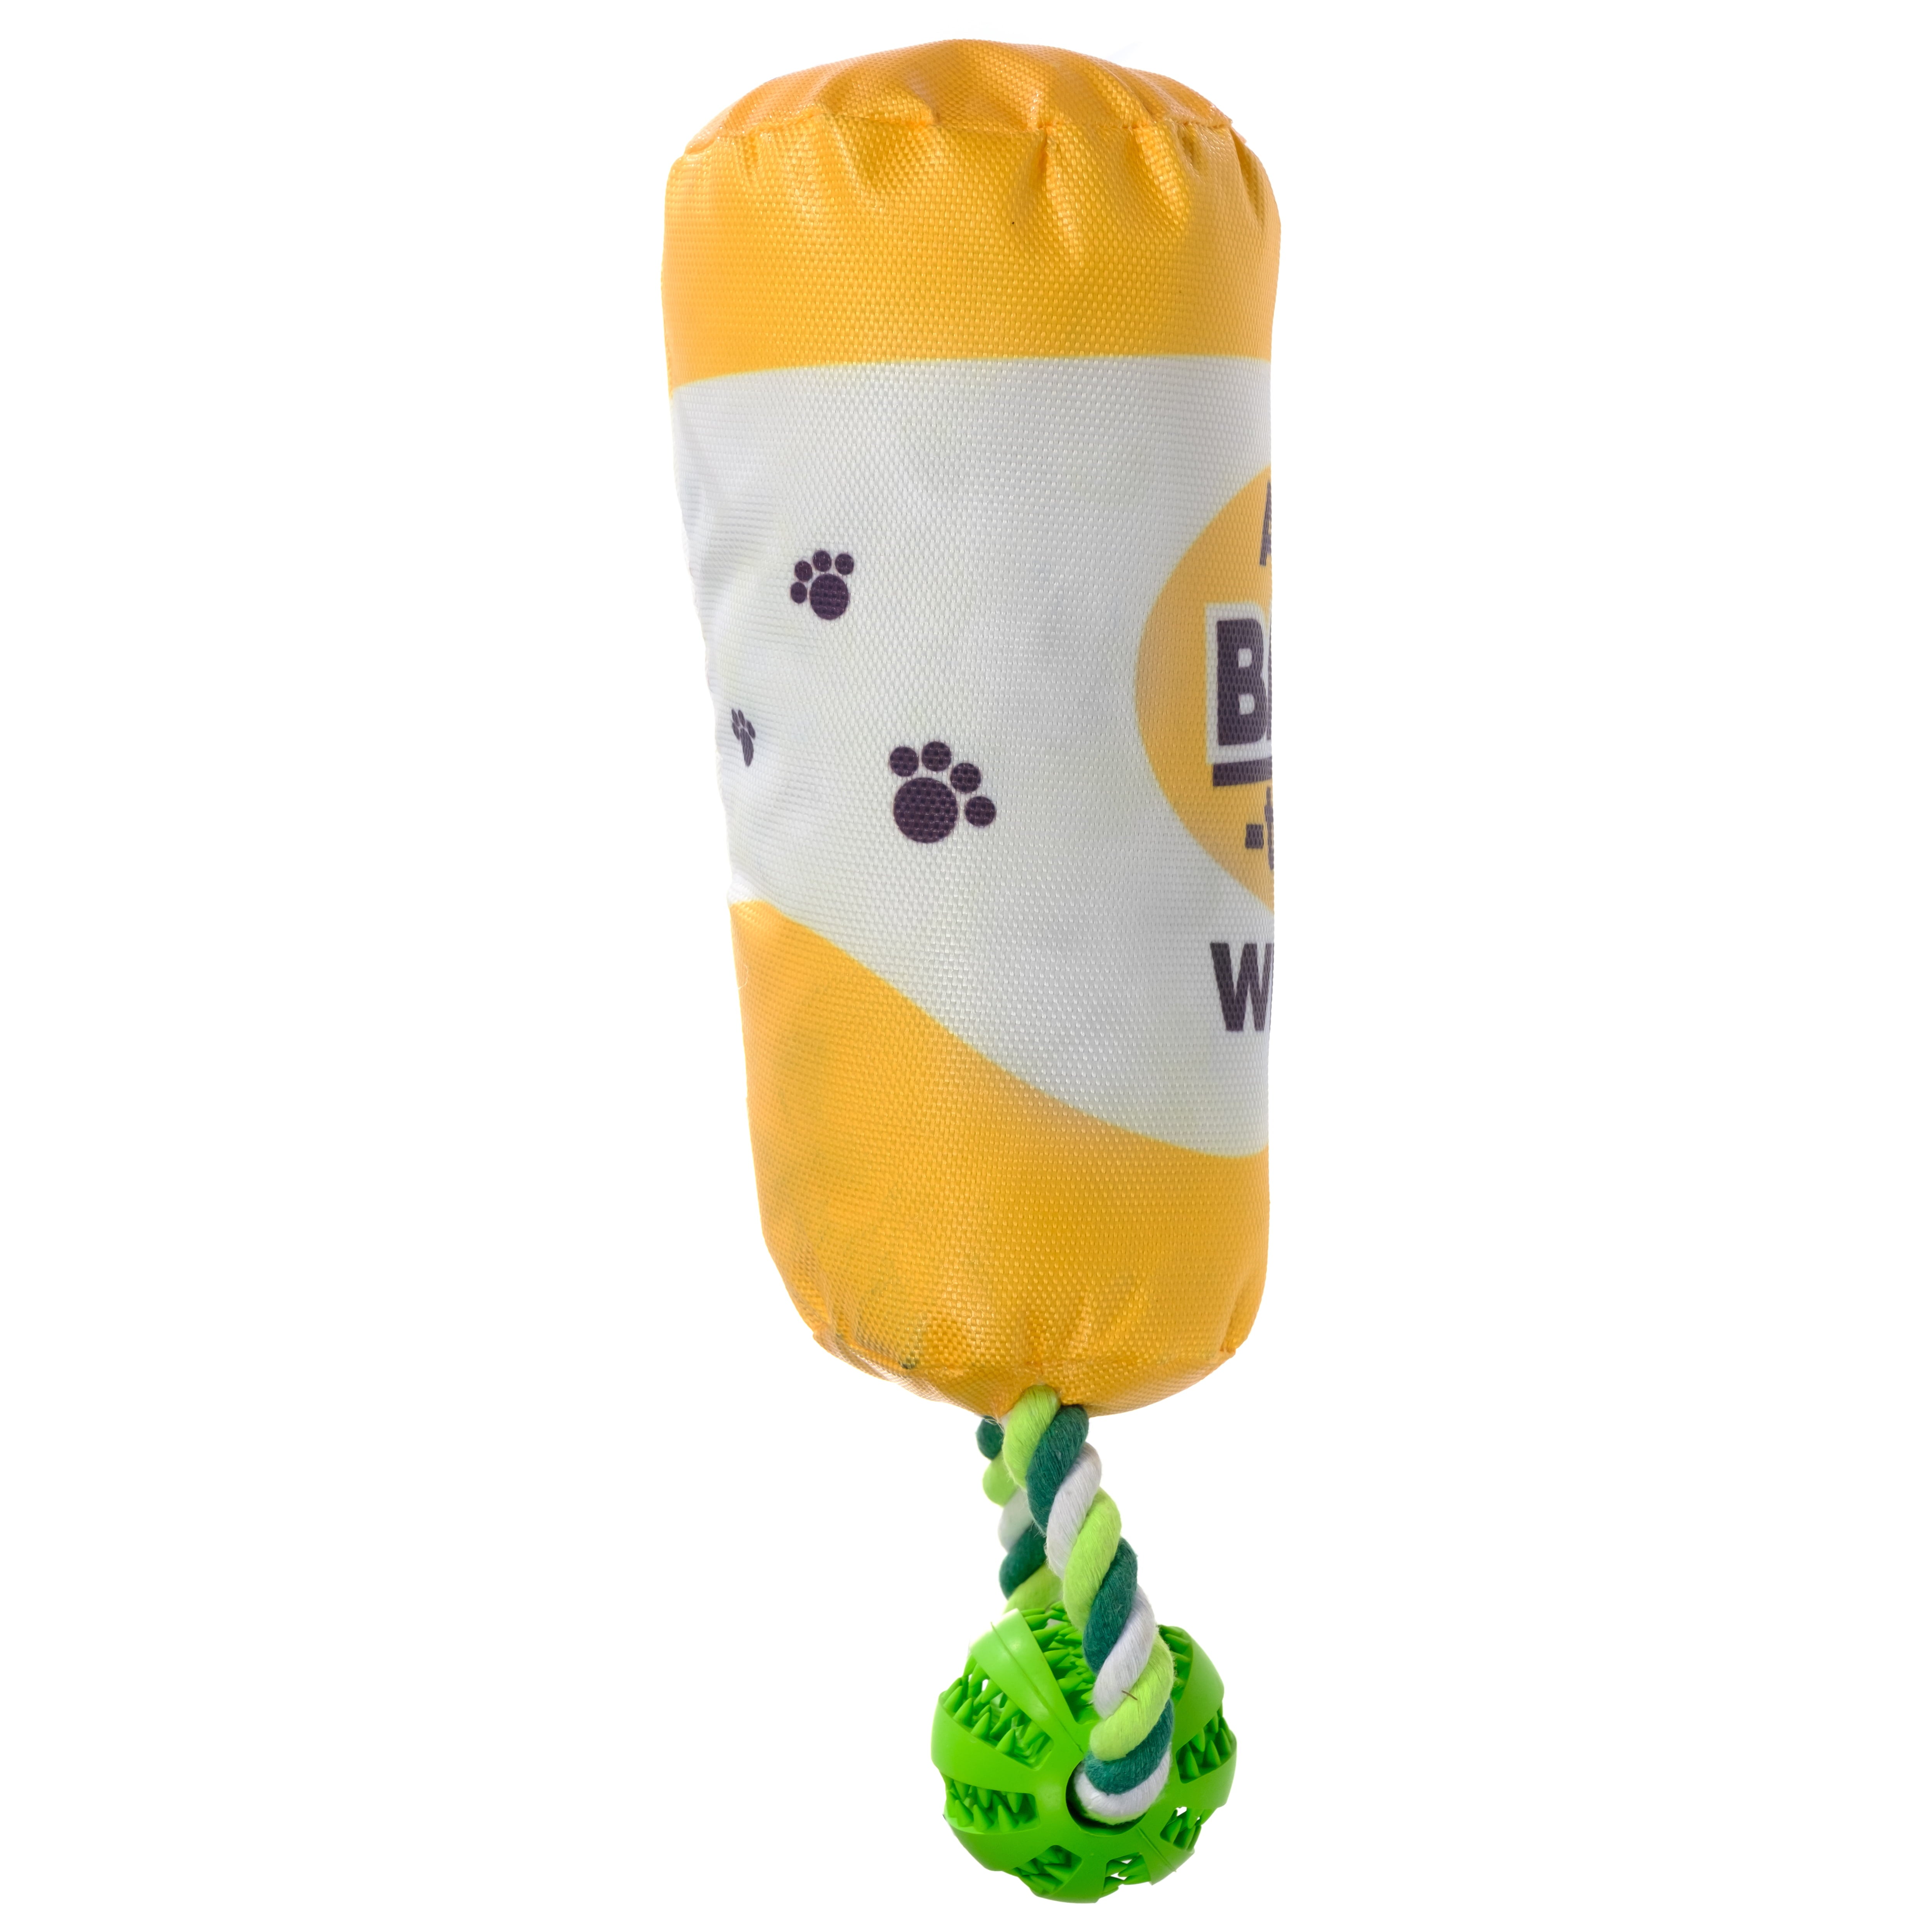 Pronk! Pets, A Variety of Soft Plush Squeaky Rope Dog Toys, Great for Medium and Large-Sized Breeds